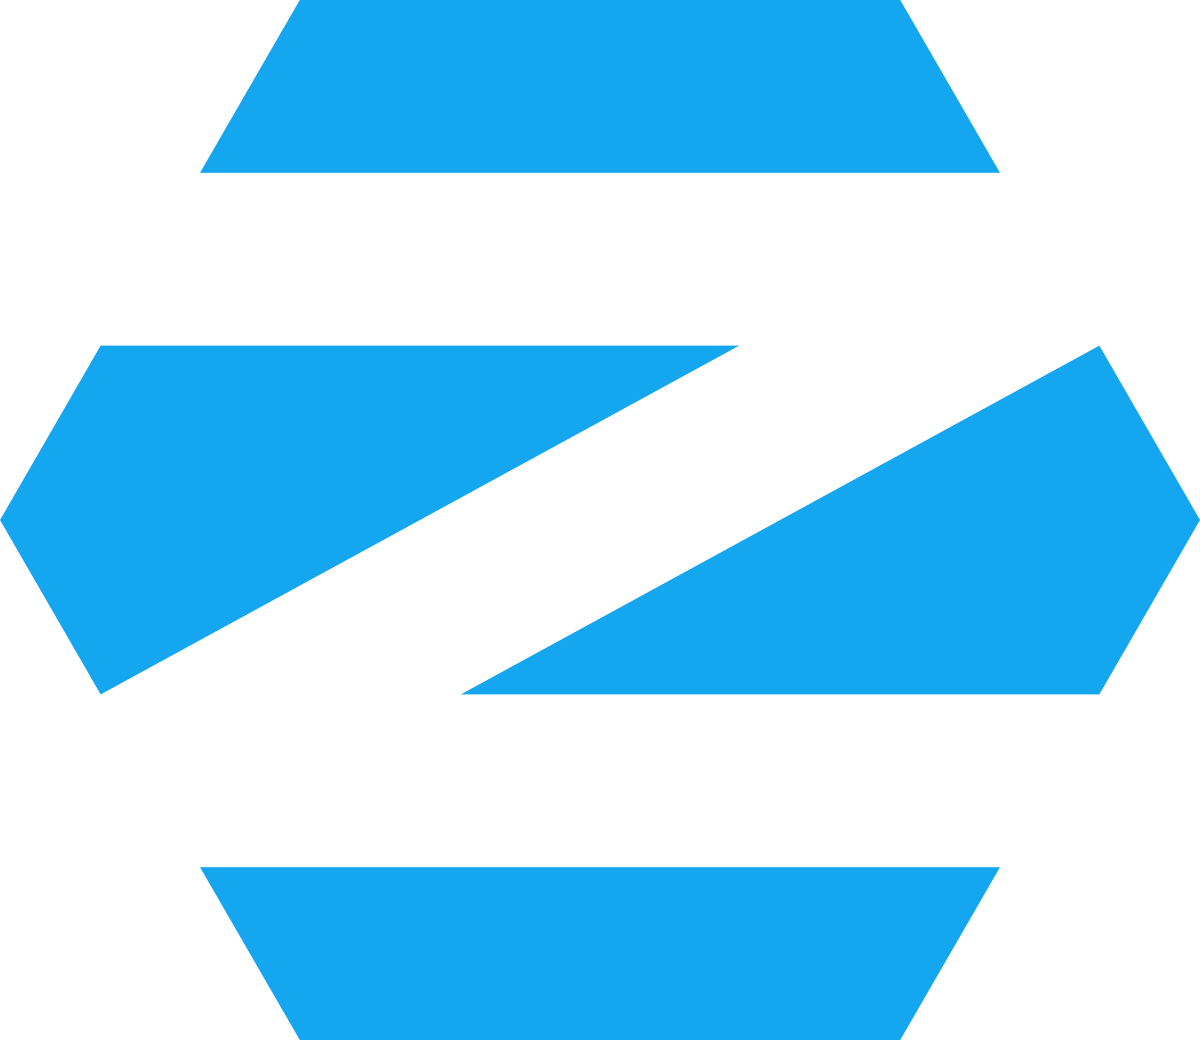 Zorin OS - Make your computer faster, more reliable easier and more powerful